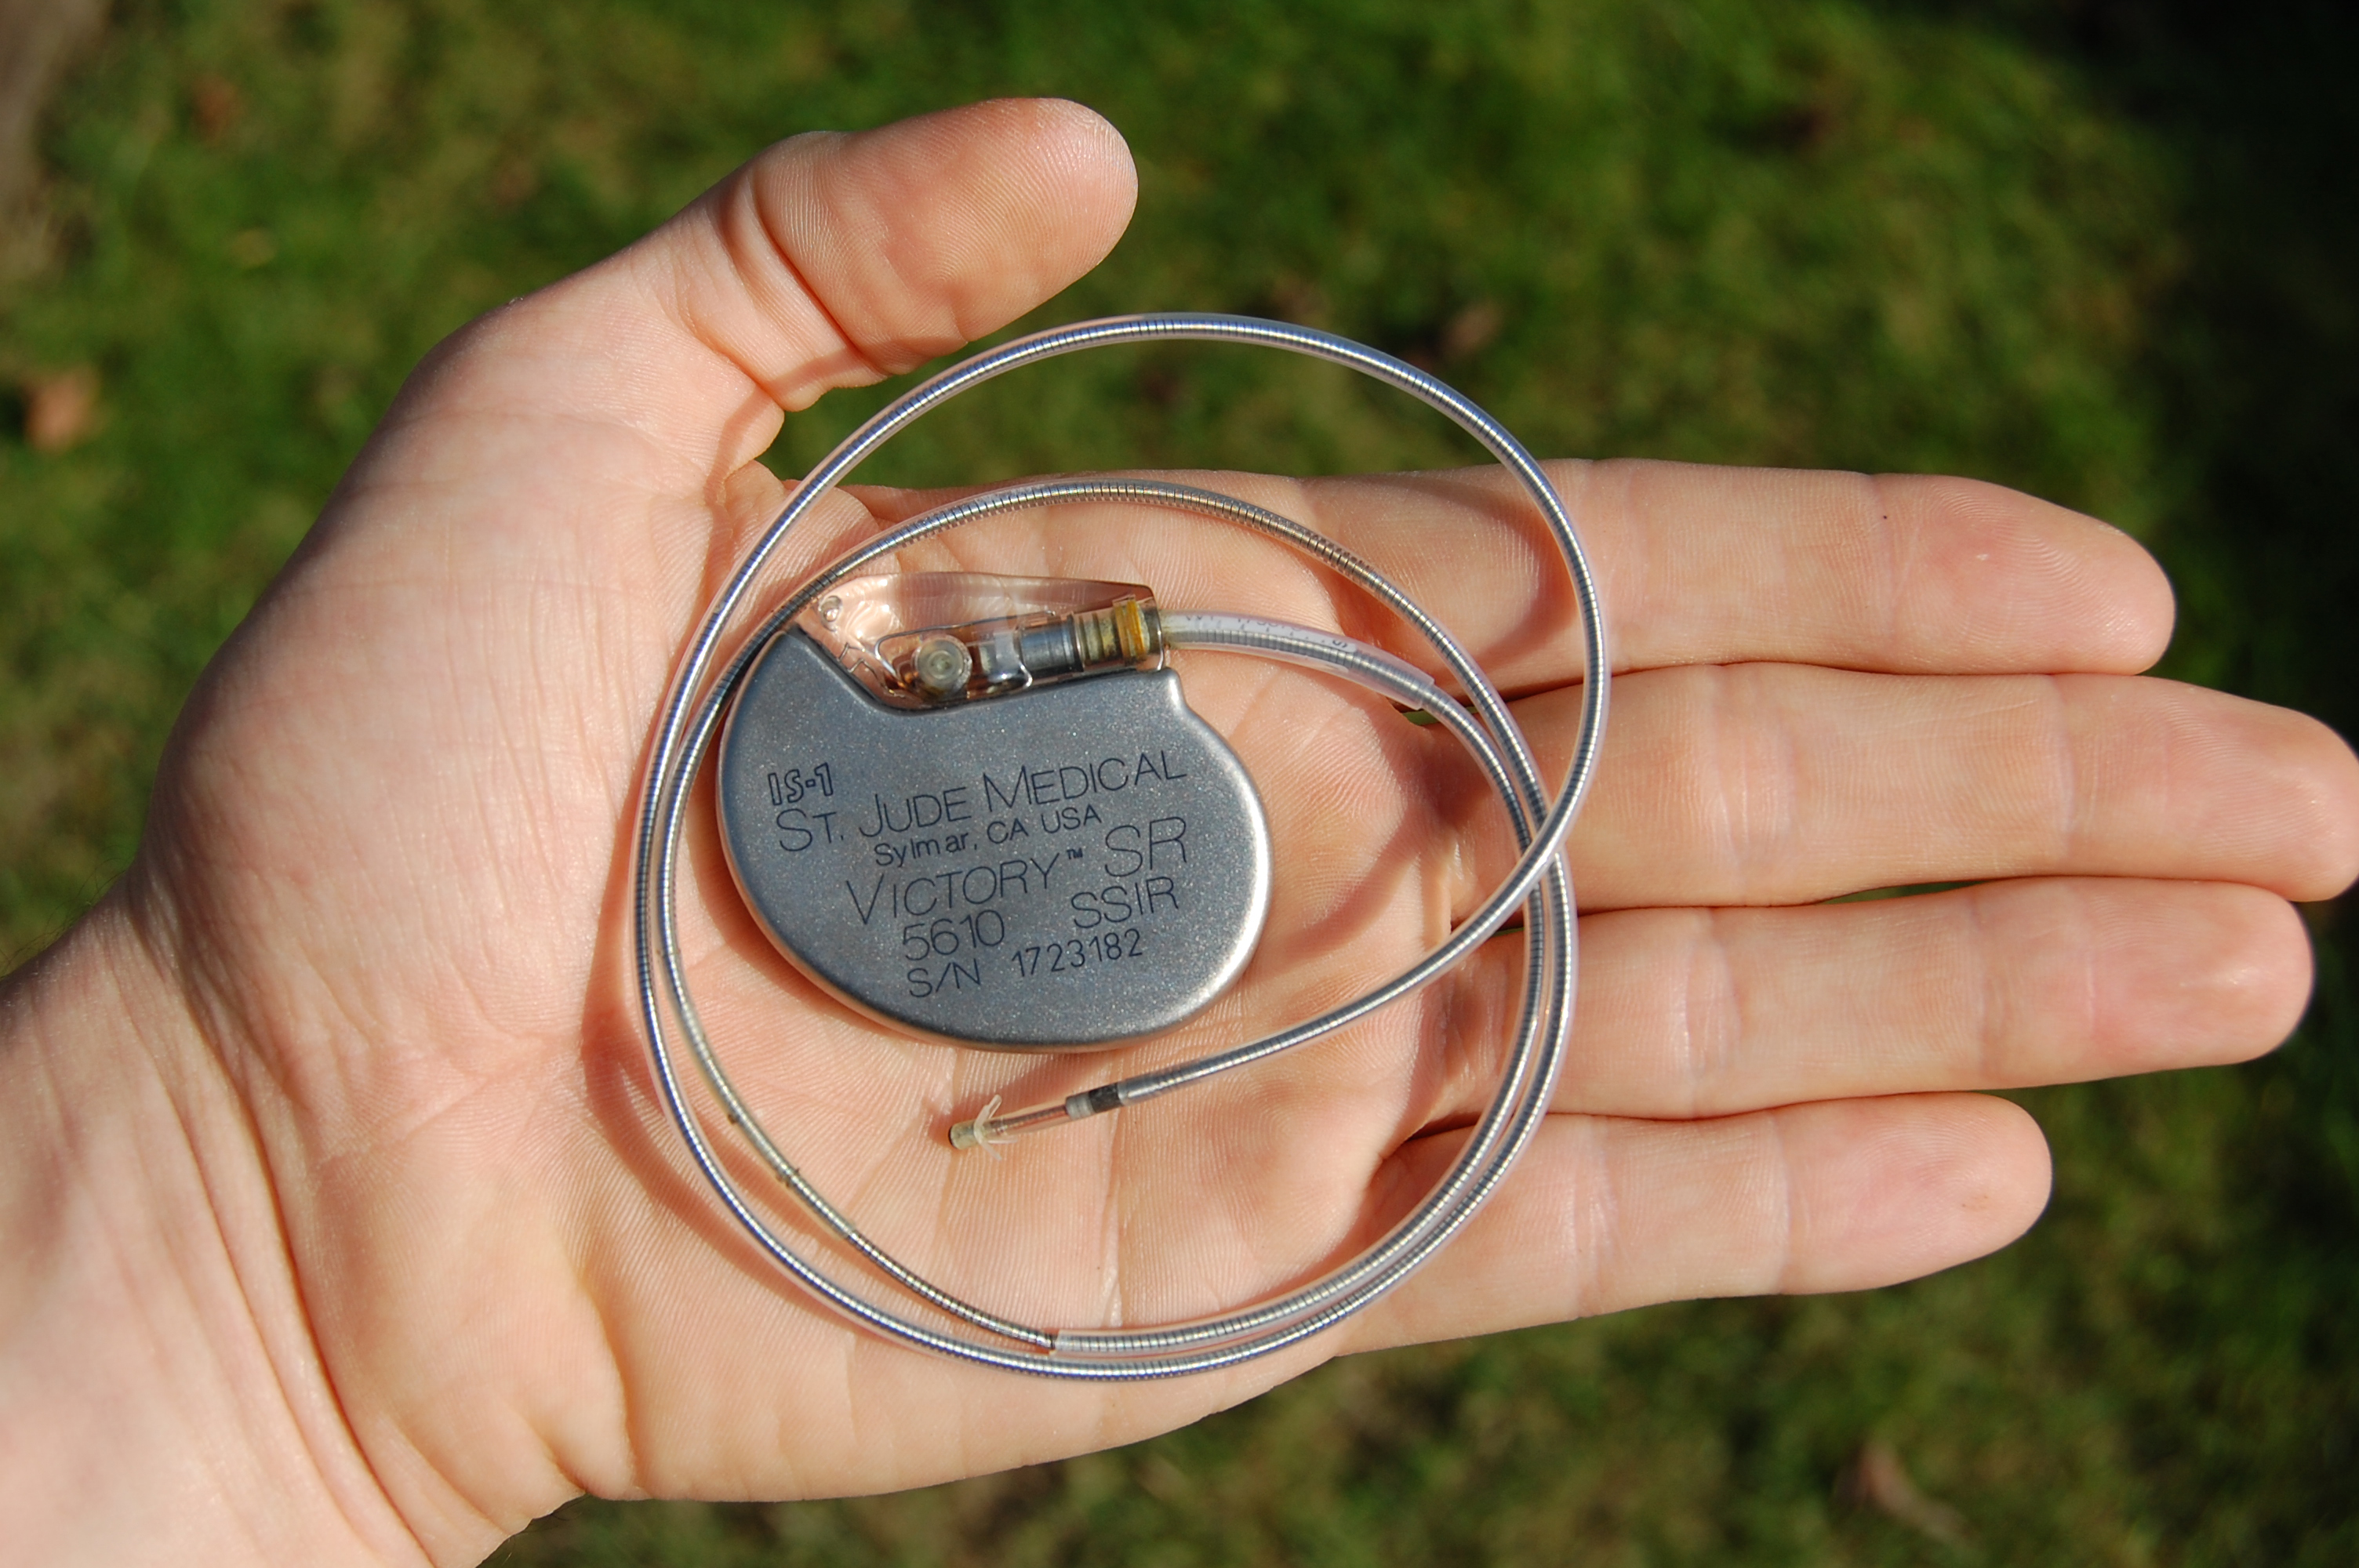 File:An artificial pacemaker shown in hand with electrode and lead (from St Jude medical).jpg